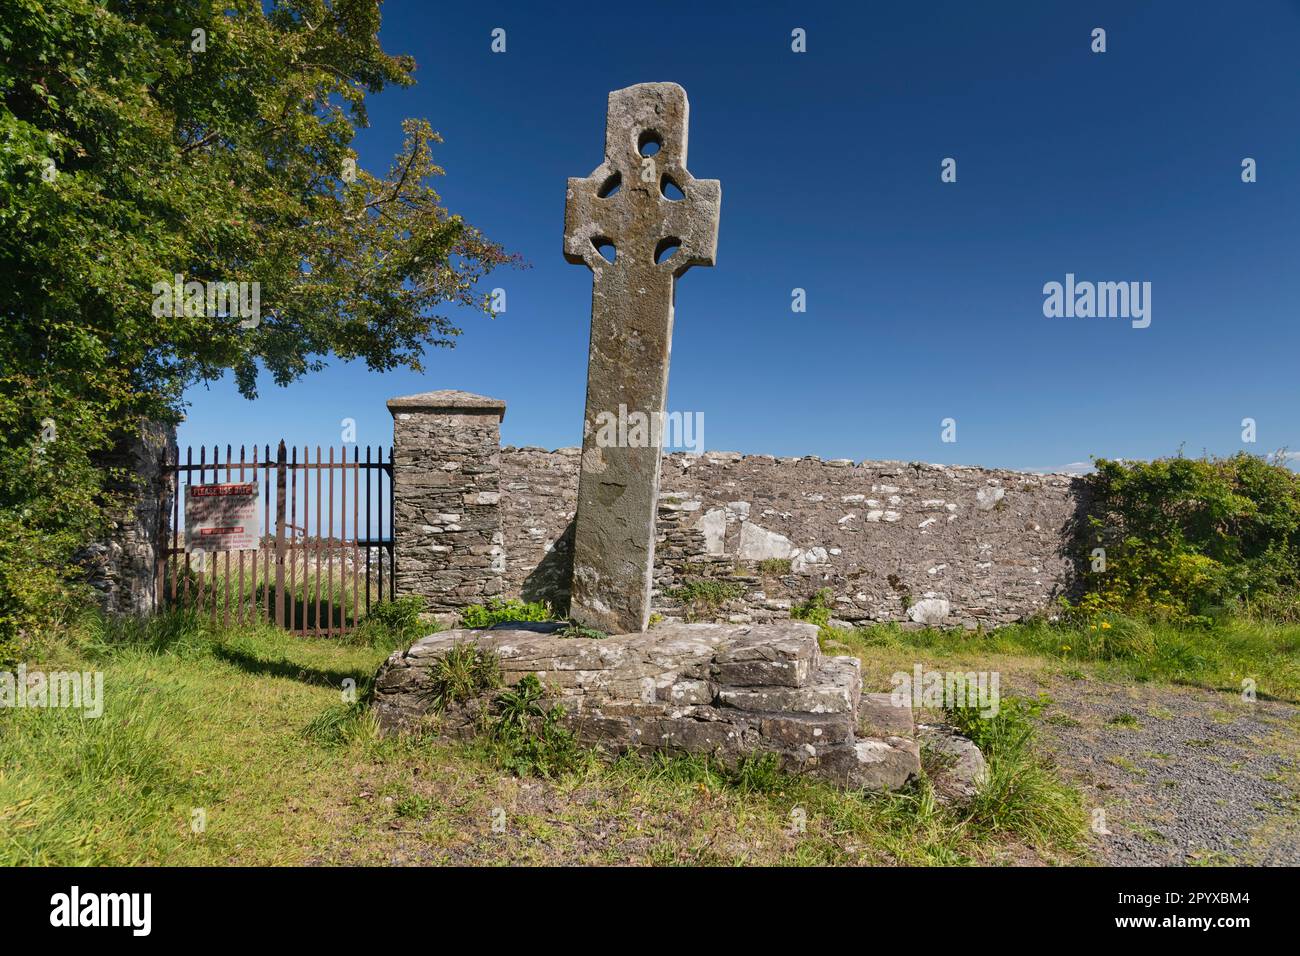 Ireland, County Donegal,  Inishowen Peninsula, Moville monastic site, 8th century Cooley Cross which is uncarved. Stock Photo